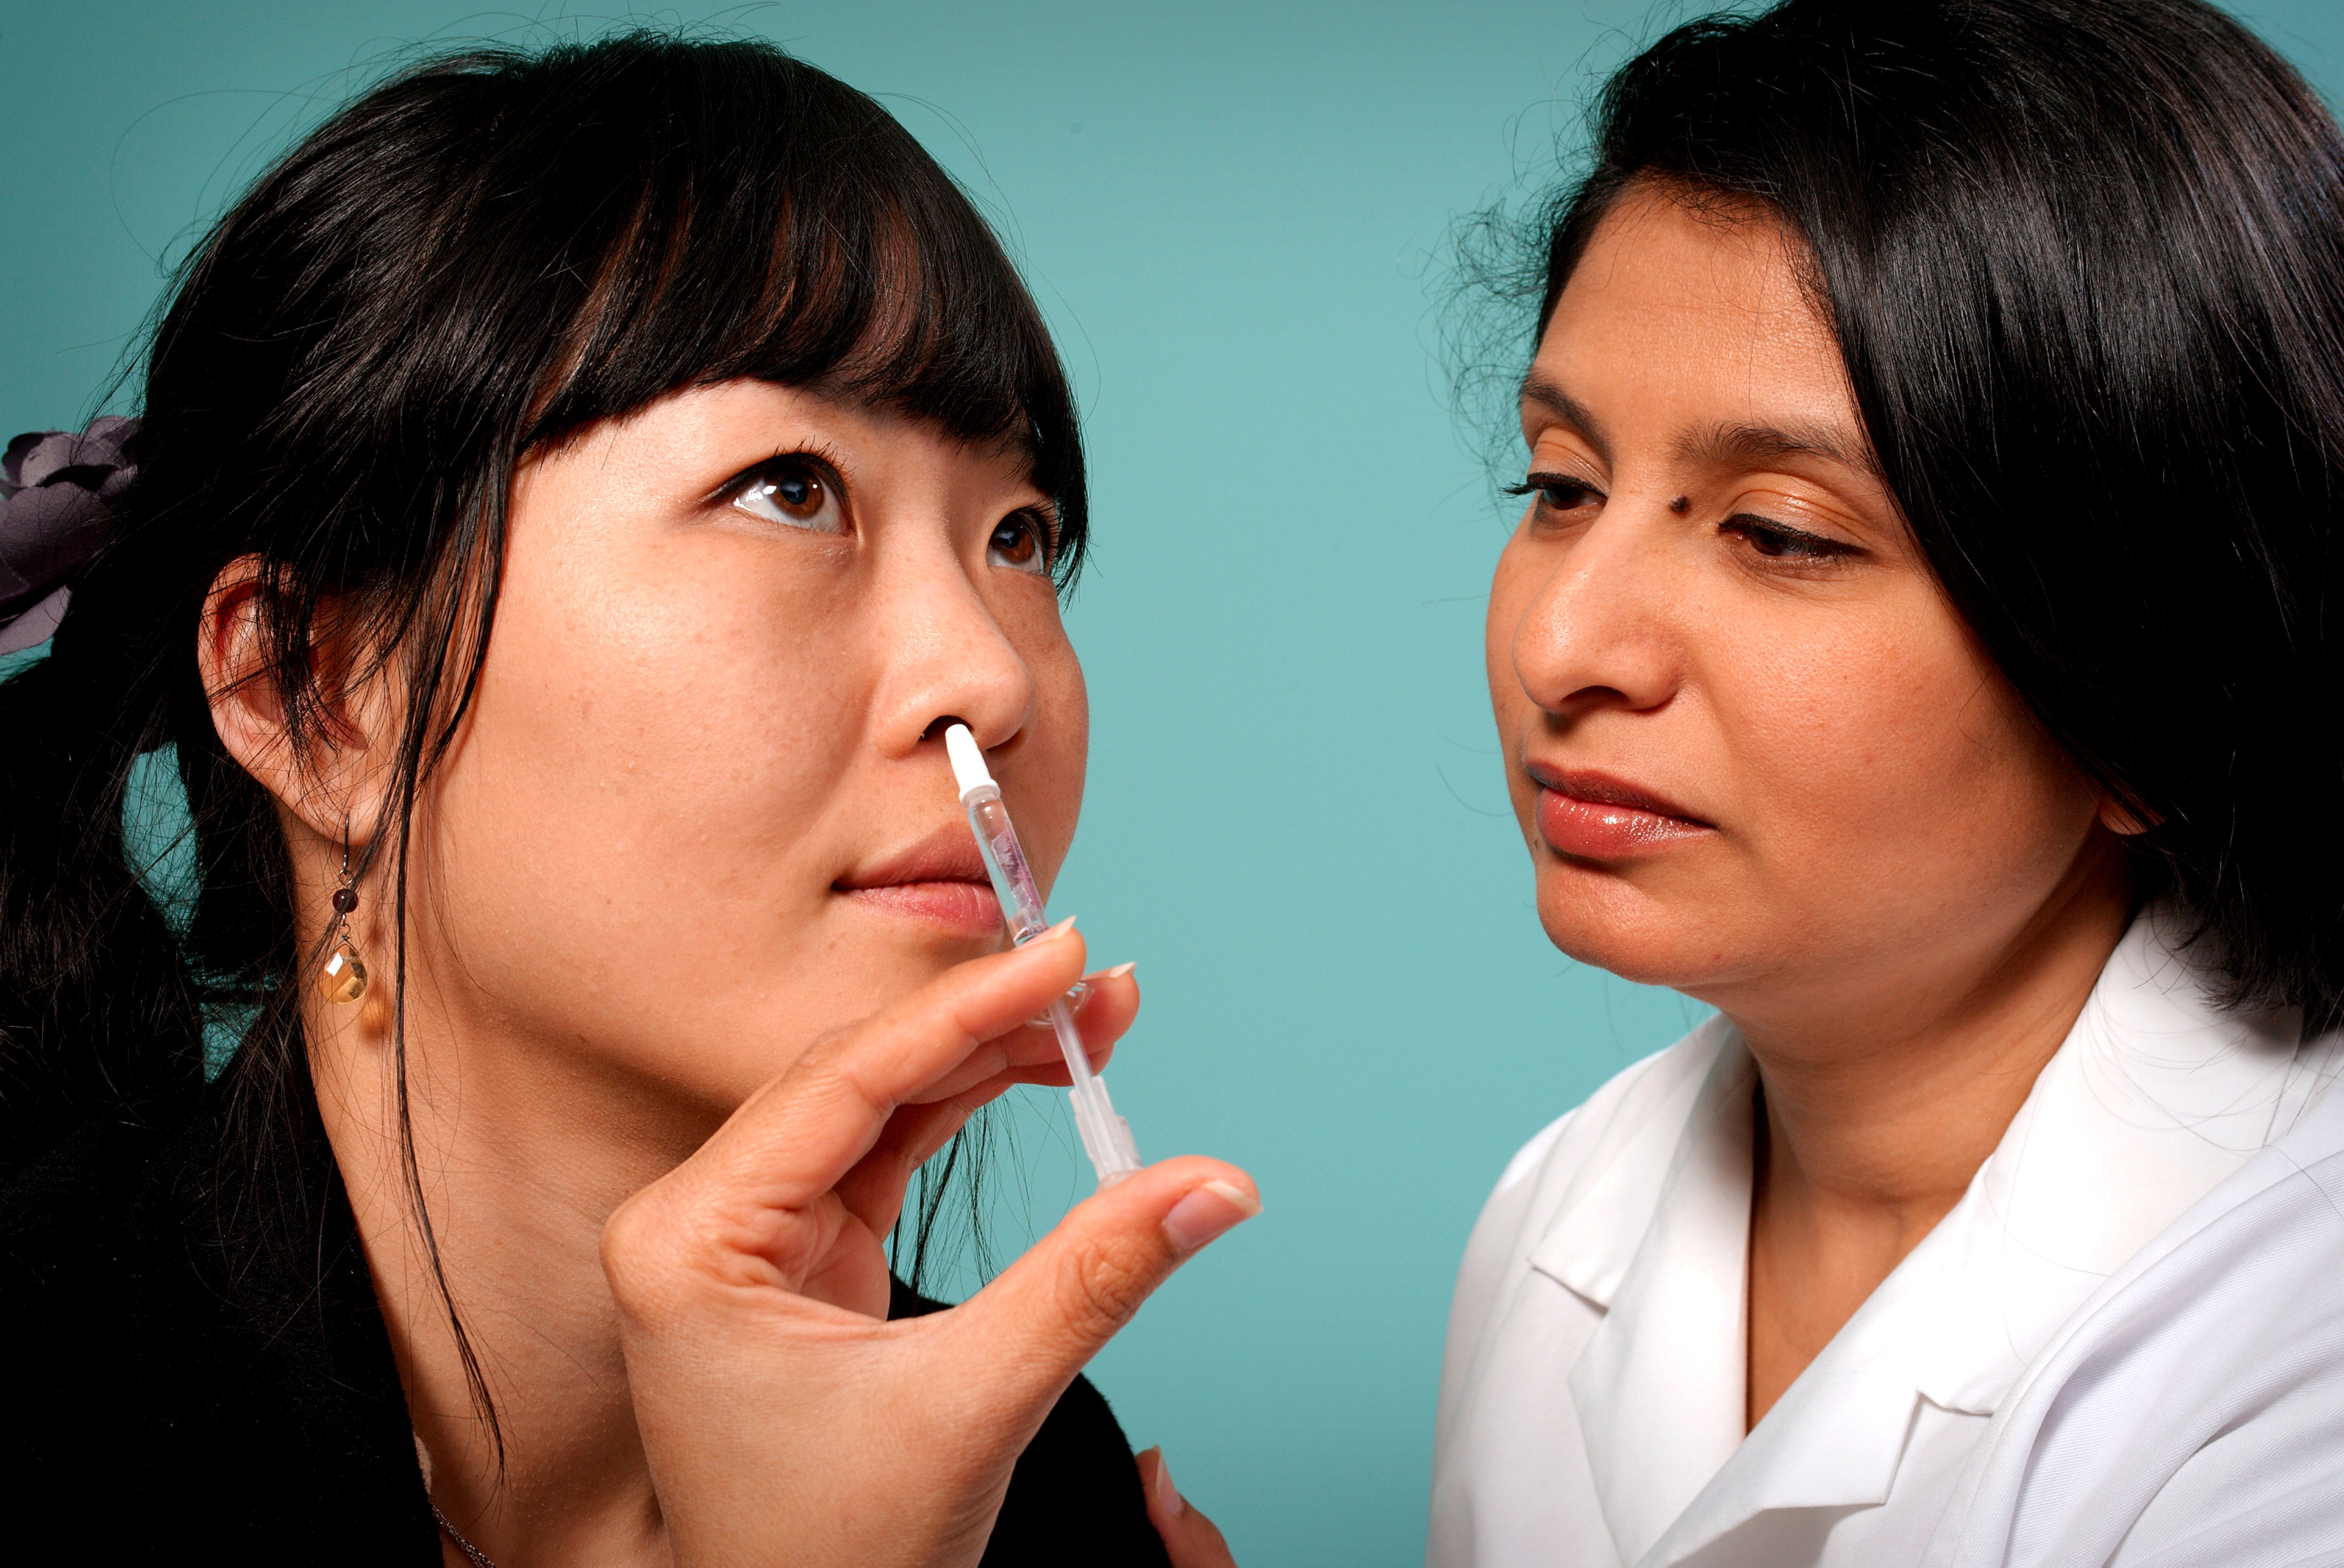 http://www.pixnio.com/free-images/science/medical-science/close-up-of-faces-of-asian-woman-and-her-female-doctor.jpg